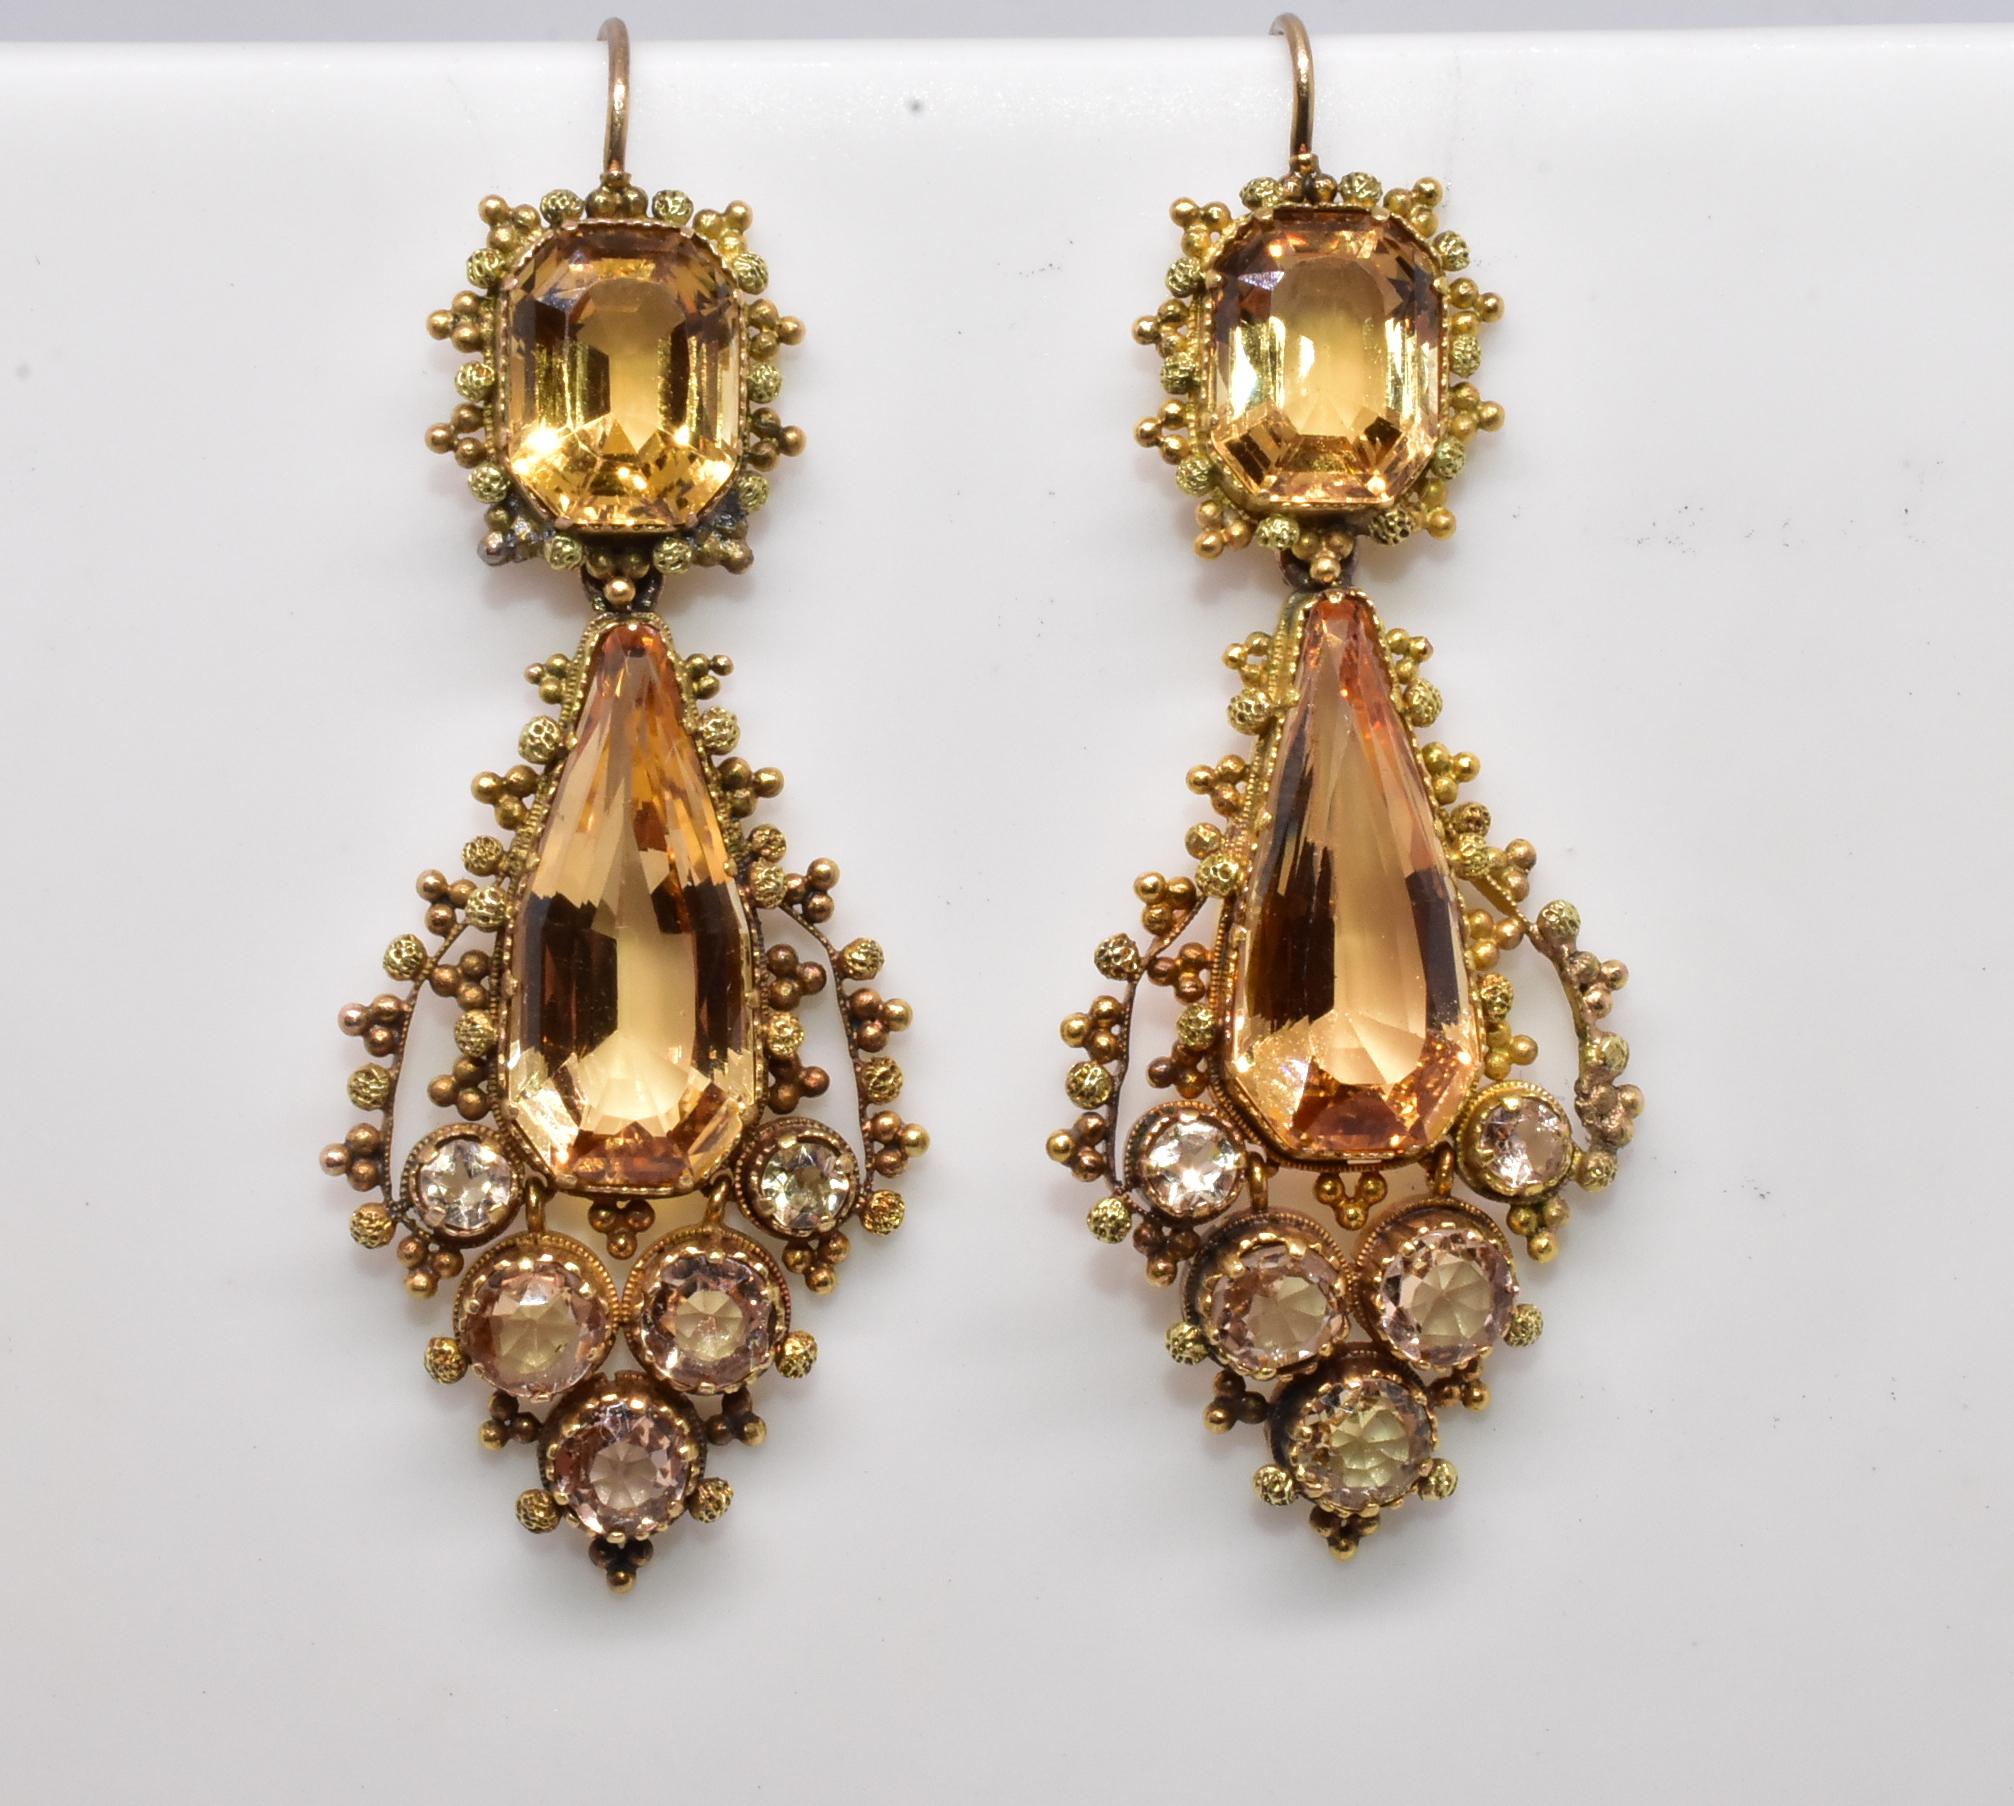 A fabulous pair of Georgian pendant earrings composed of Imperial topaz, brilliant cut diamonds and 18k gold, these would have been worn on the most elegant of occasions. The extensive facets and open mount setting maximize the light and give them